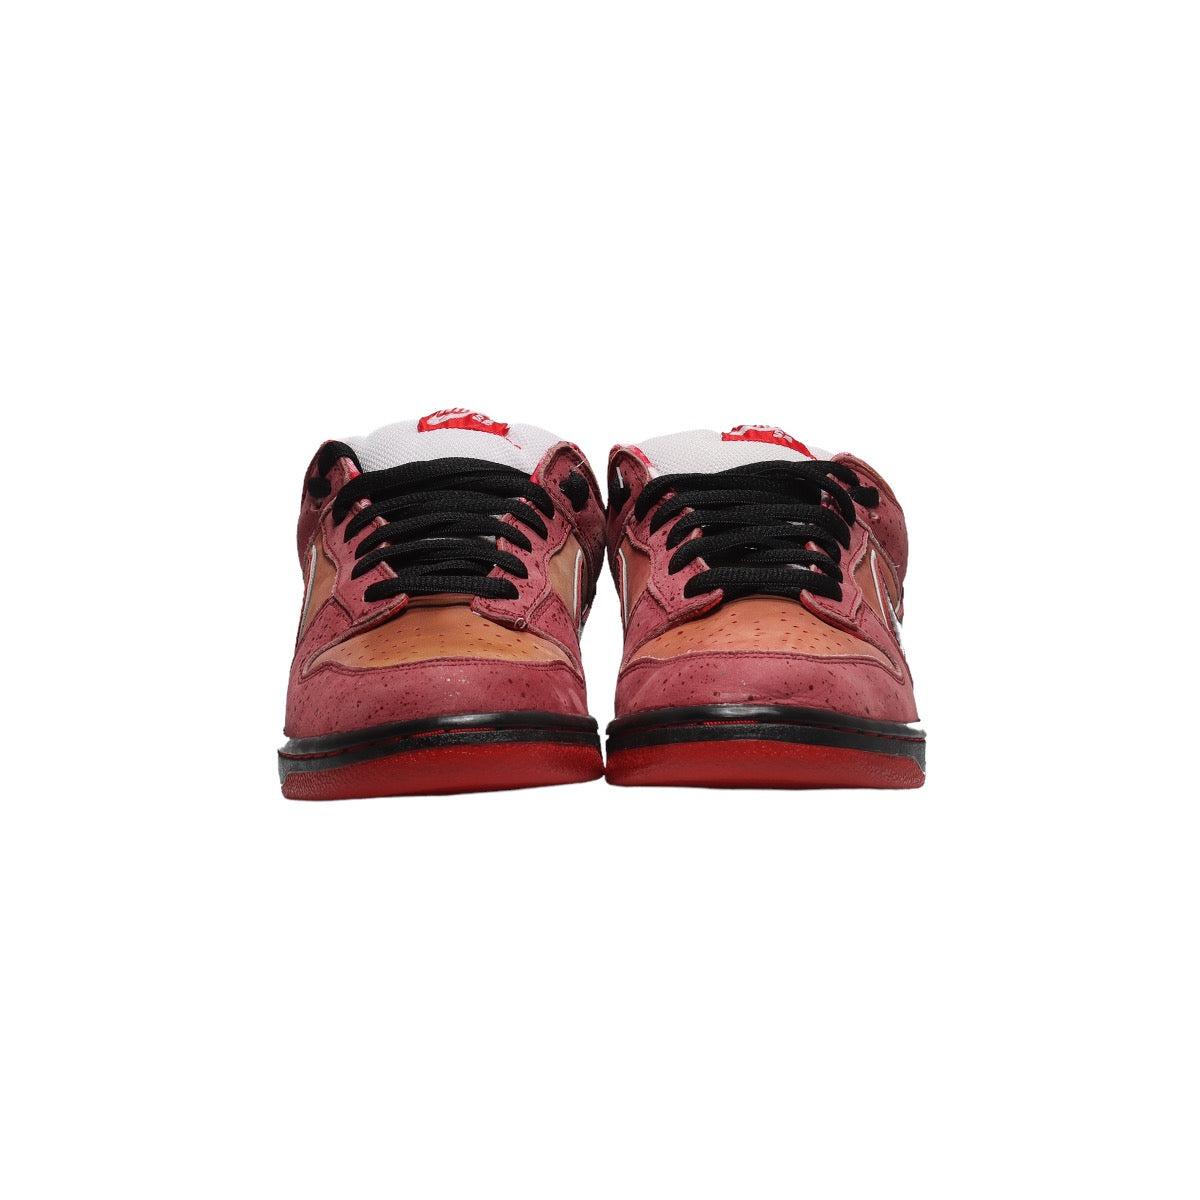 Nike Dunk SB Low Red Lobster Low